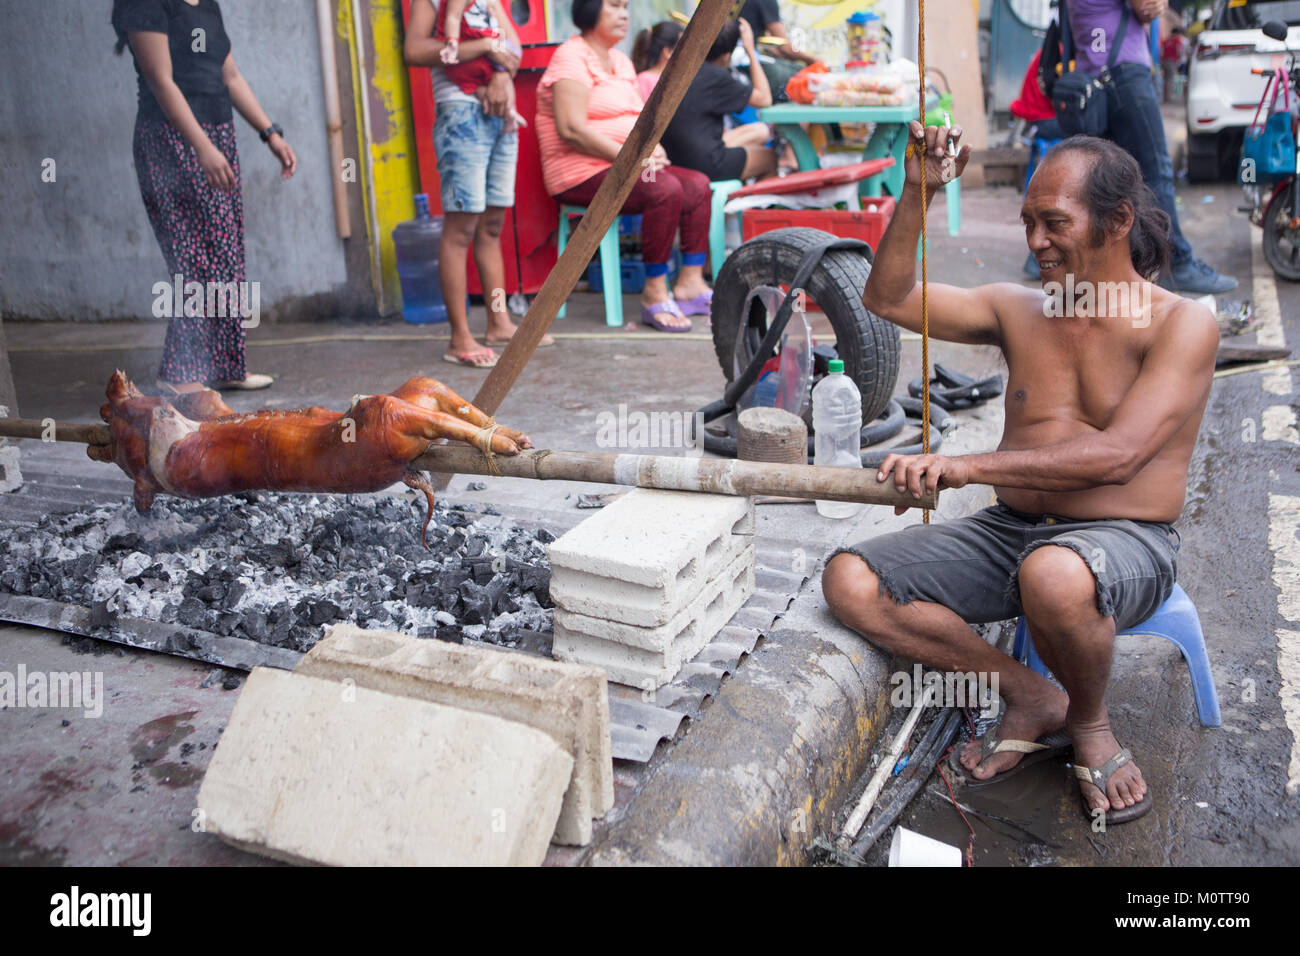 A man Spit Roasts a pig known as Lechon Baboy in the Philippines. Regarded as a National favourite dish. Stock Photo